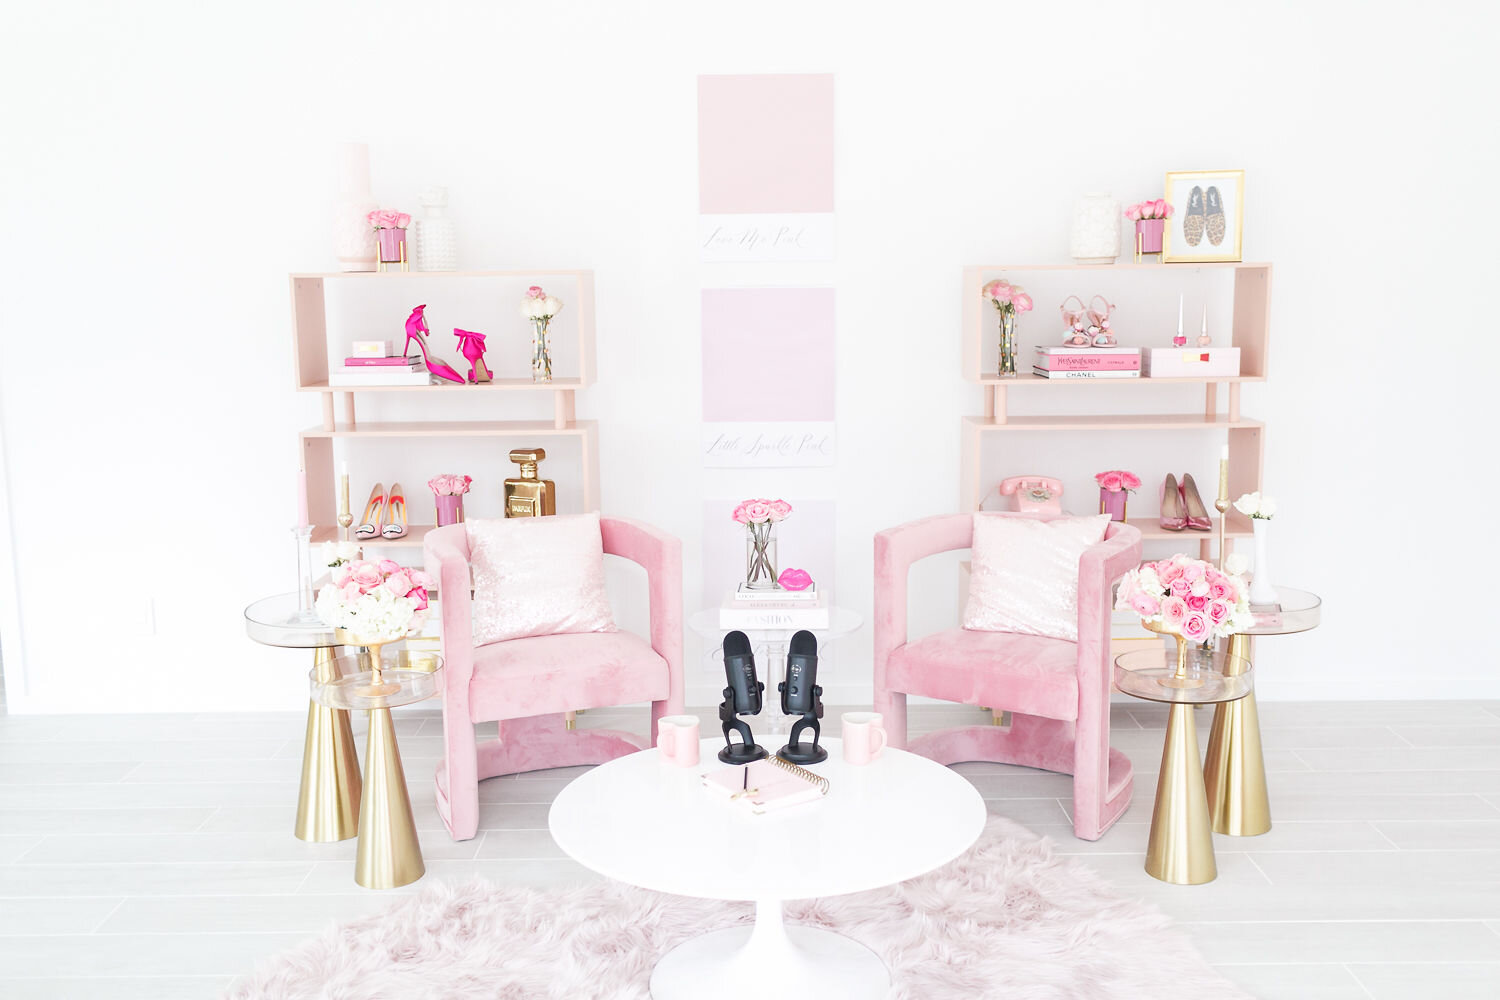 POSH-PR-The-Caroline-Doll-Barbie-Office-Pink-Style-Boss-Goals-At-Home-Workspace-Luxury-Fashion-Infused-Office-The-Doll-HQ-Photoshoot-Studio-Branding-Photoshoots-5.jpg